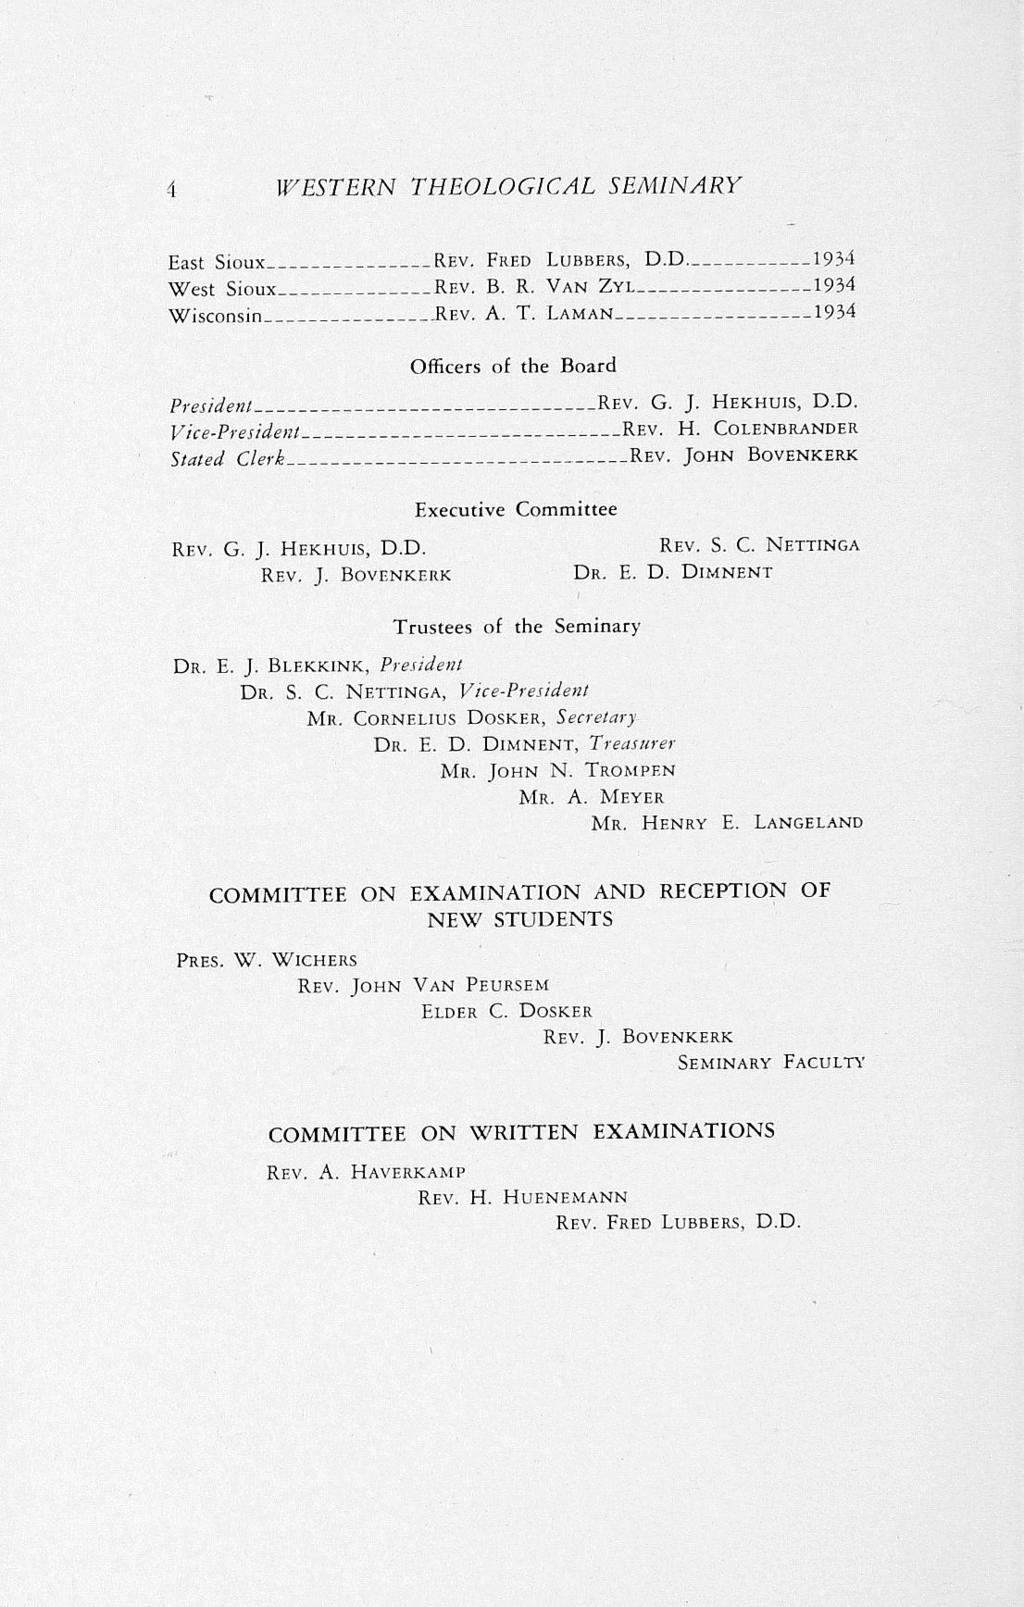 4 WESTERN THEOLOGICAL SEMINARY East Sioux_. West Sioux. Wisconsin.. Rev. Fred Lubbers, D.D ------------ 1934 Rev. B. R. Van Zyi 1934.Rev. A. T. Laman 1934 Pres idem ----- Vice-President Stated Clerks.